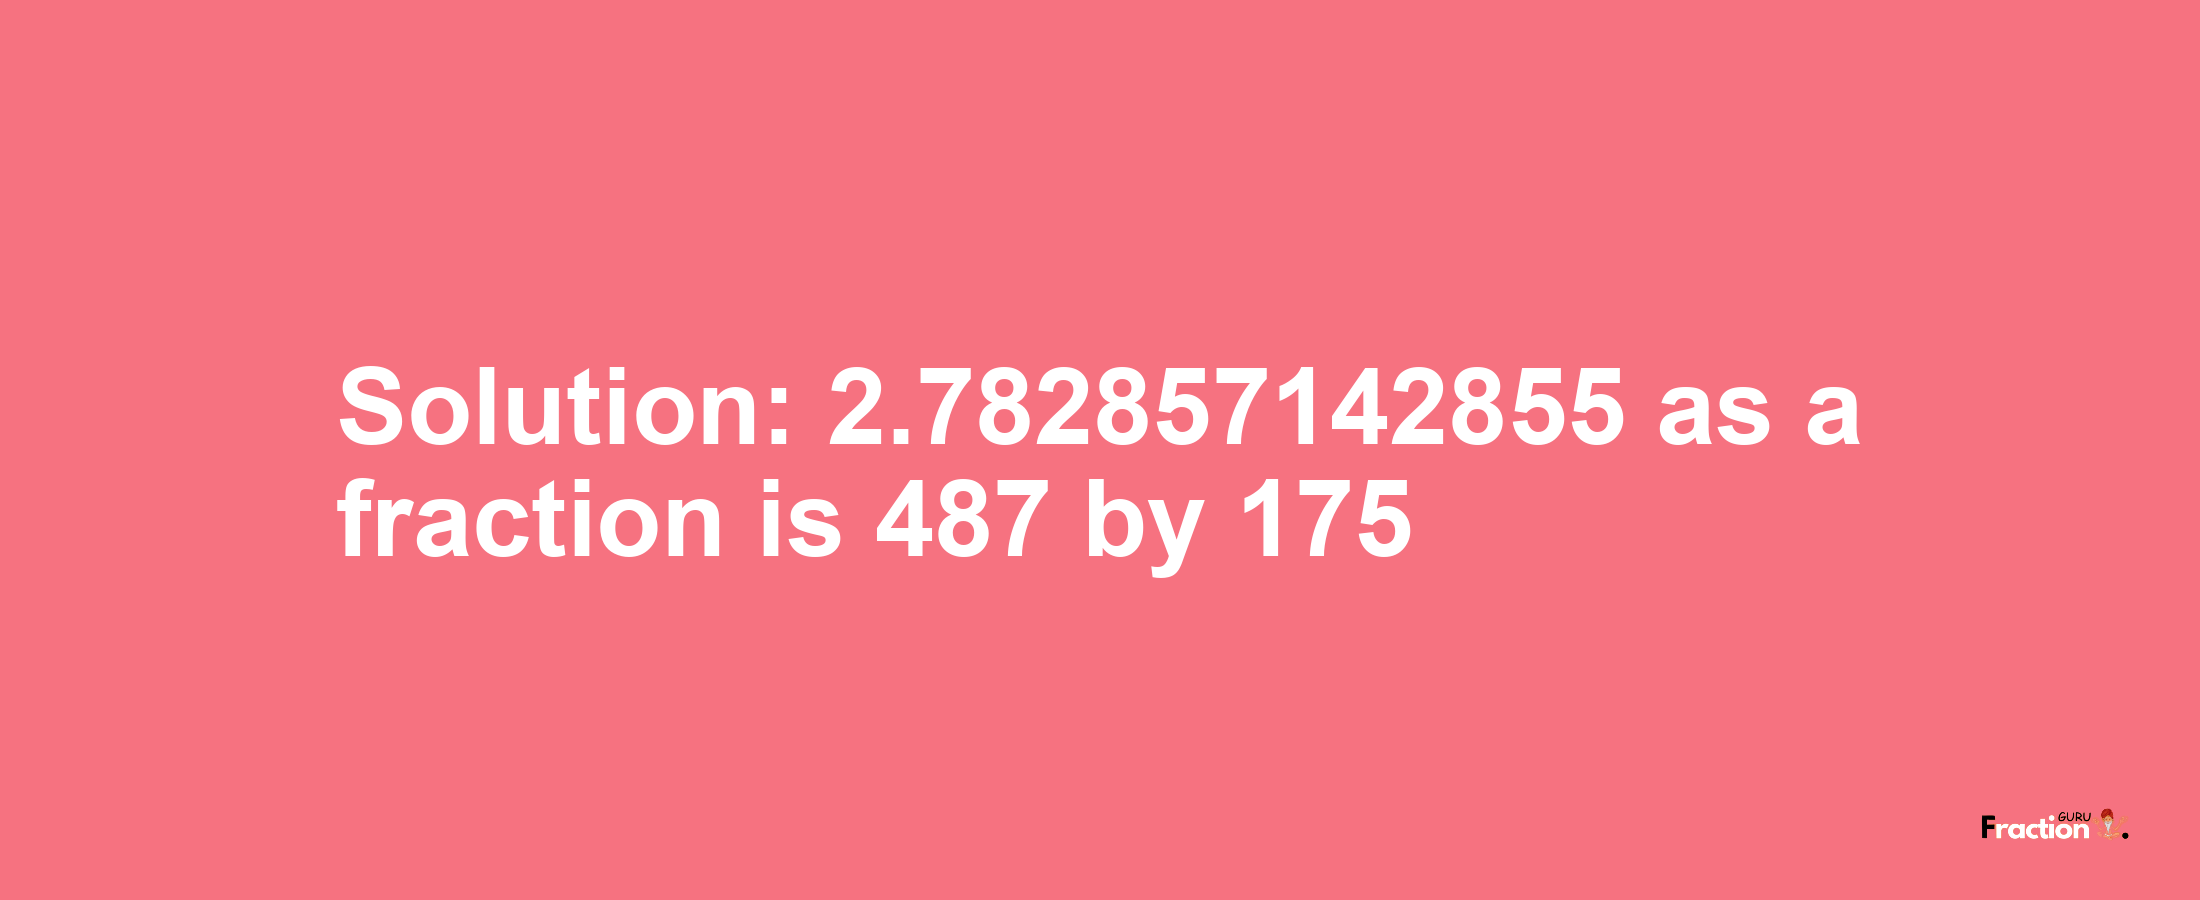 Solution:2.782857142855 as a fraction is 487/175